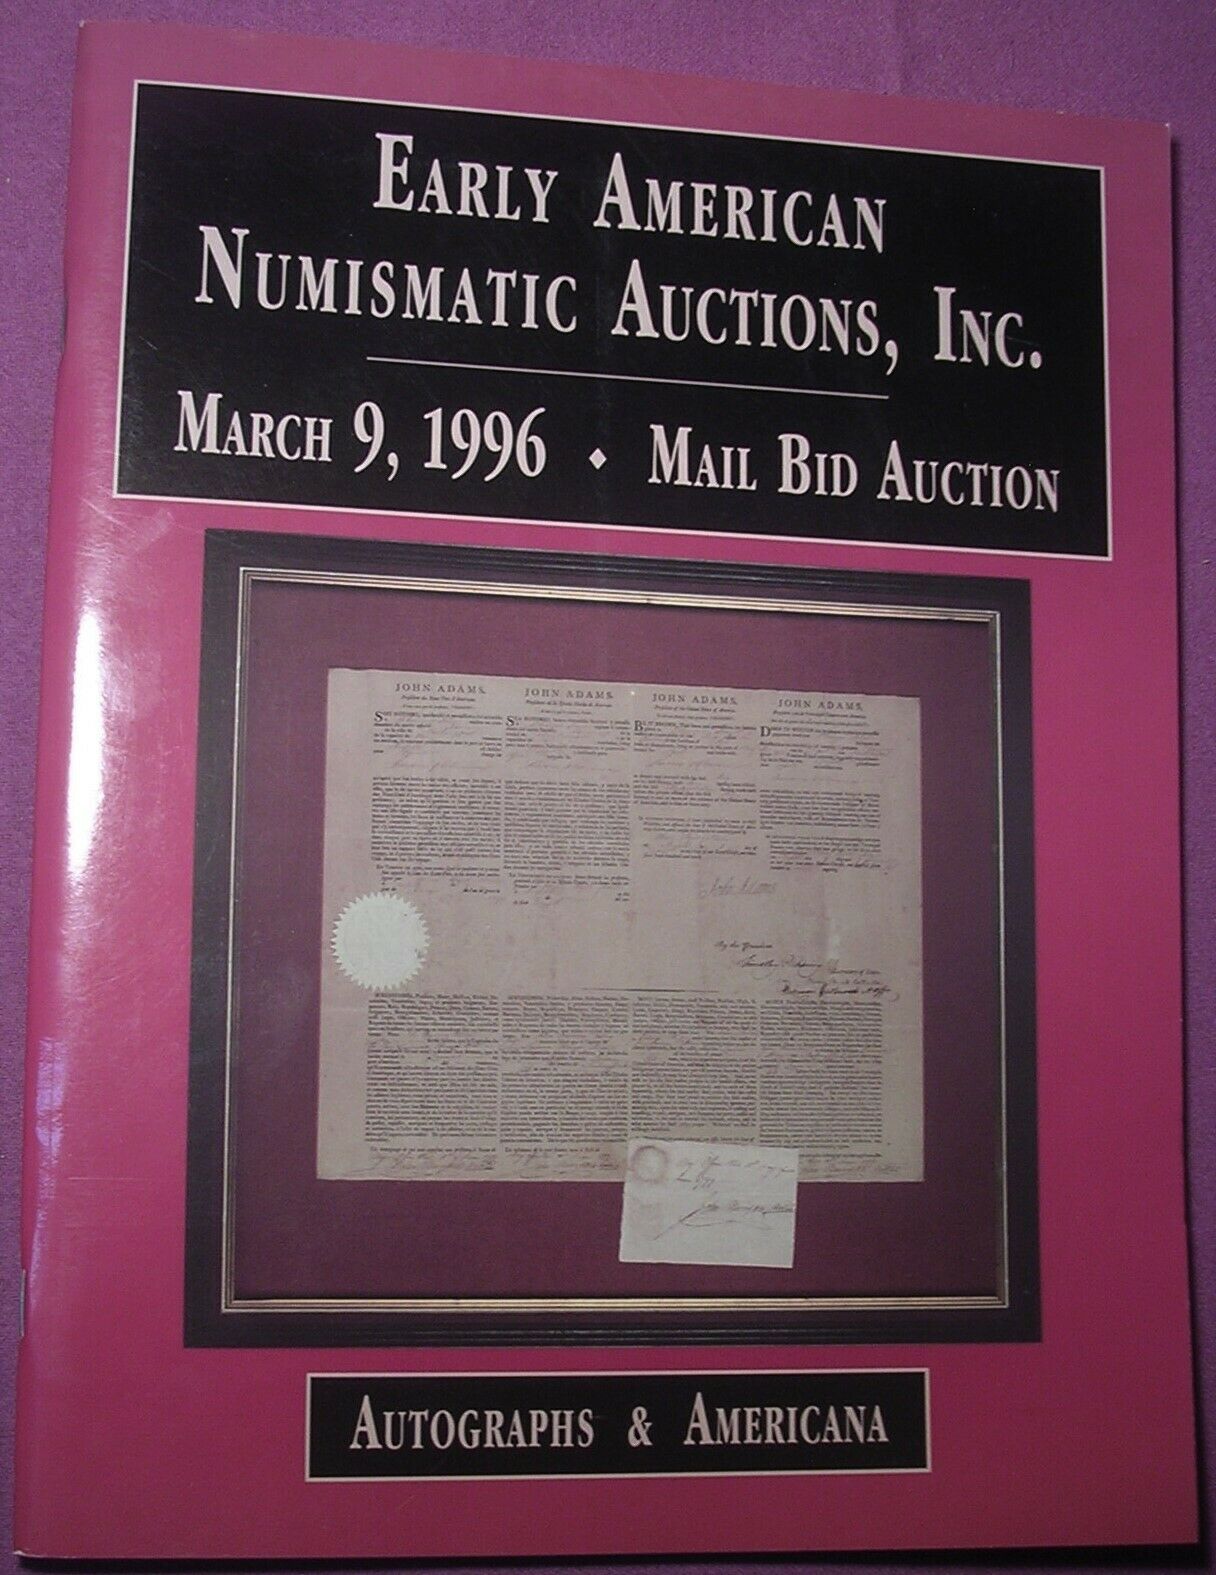 Early American Numismatic Auctions Catalog, Autographs & Americana, 9 March 1996